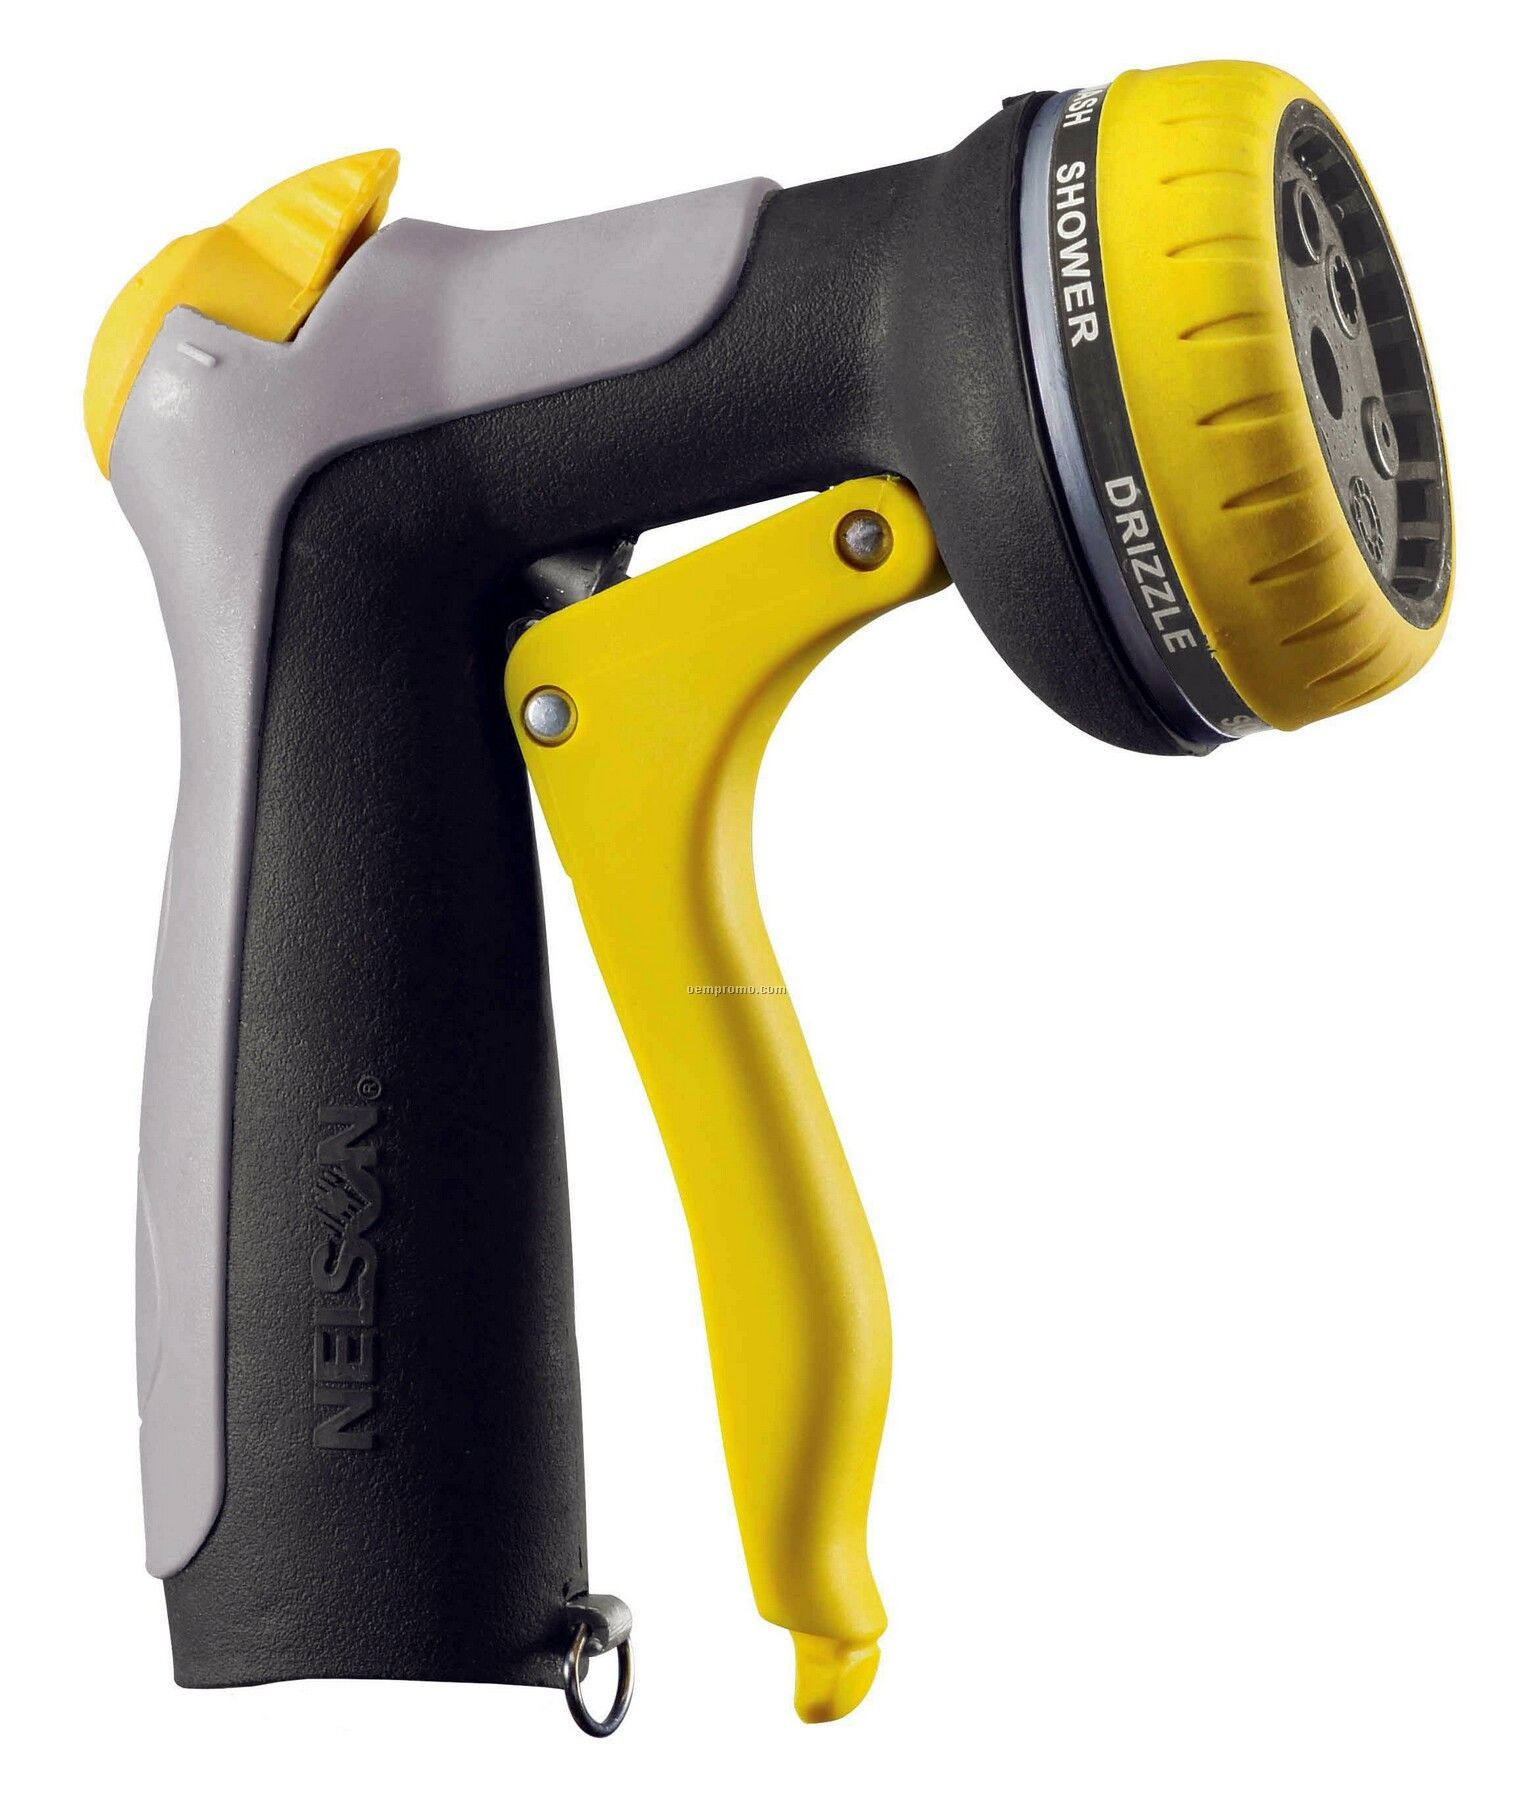 Nelson Front Trigger Multi-pattern Spray Nozzle With Flow Control